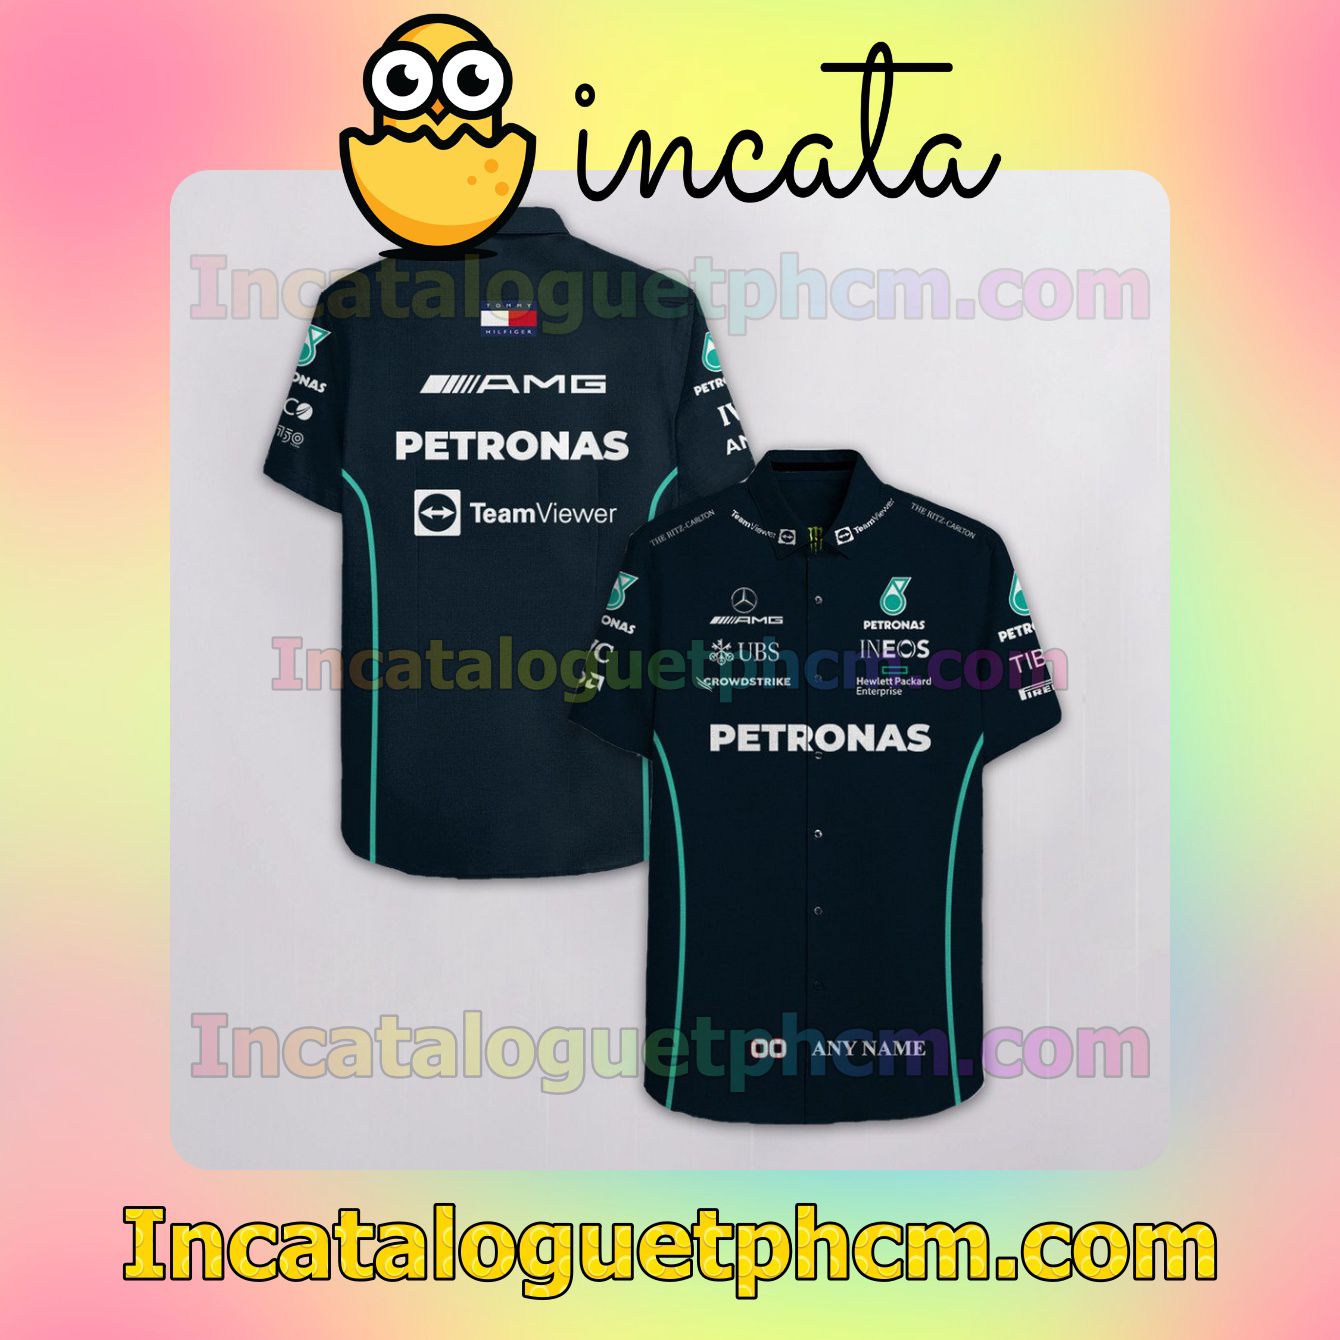 Personalized Mercedes AMG Petronas F1 Racing Team Viewer Ineos Ubs Button Shirt And Swim Trunk